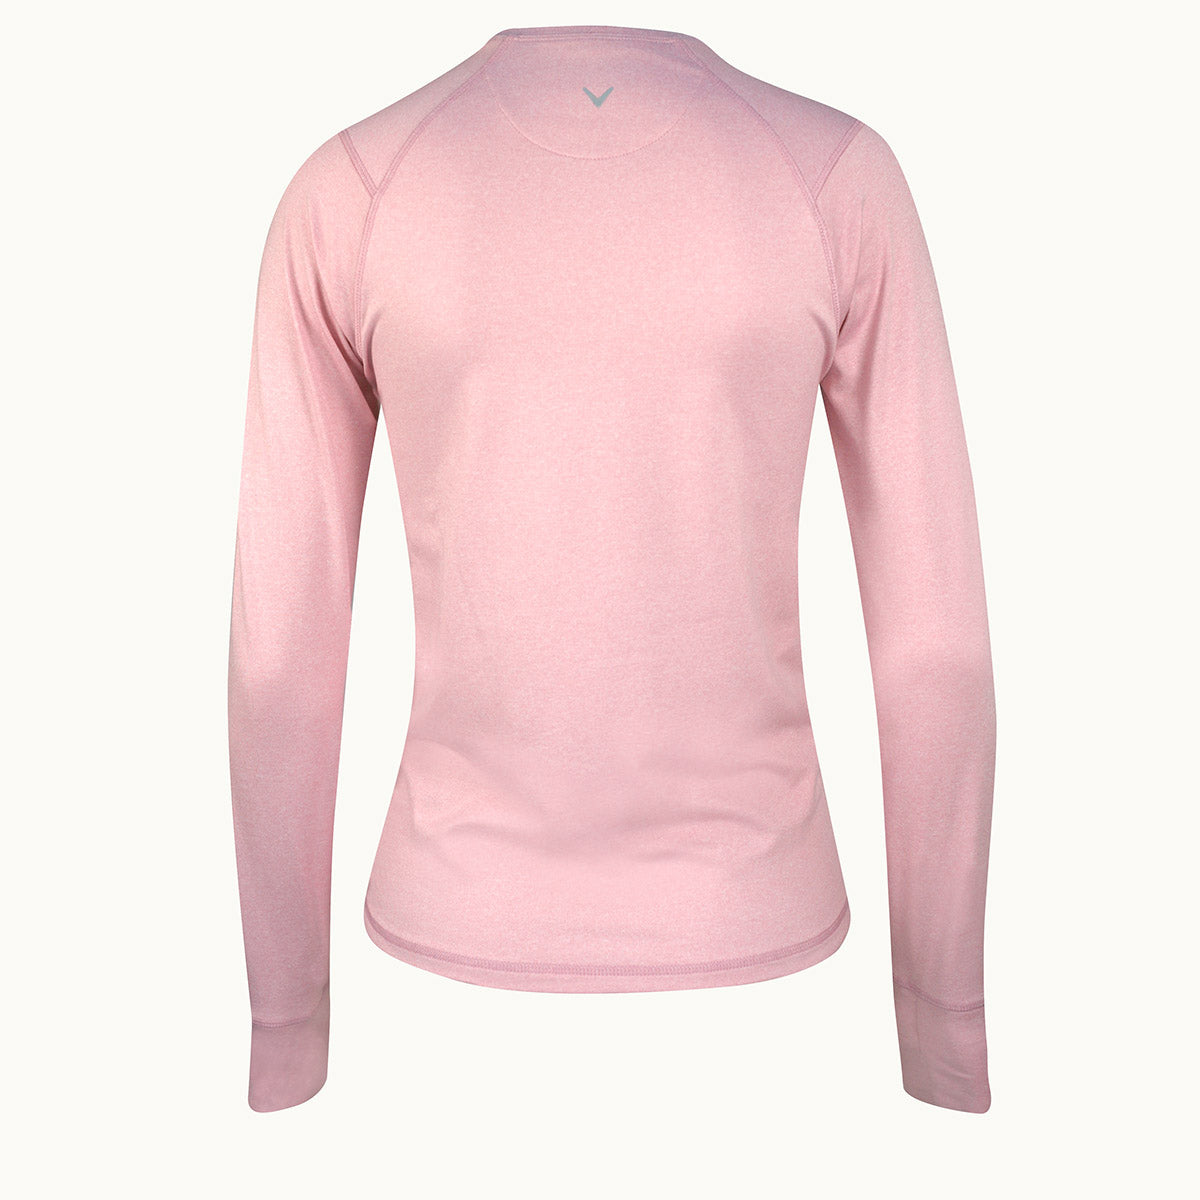 Callaway Ladies Long Sleeve Crew Neck Base Layer in Pink Nectar Heather